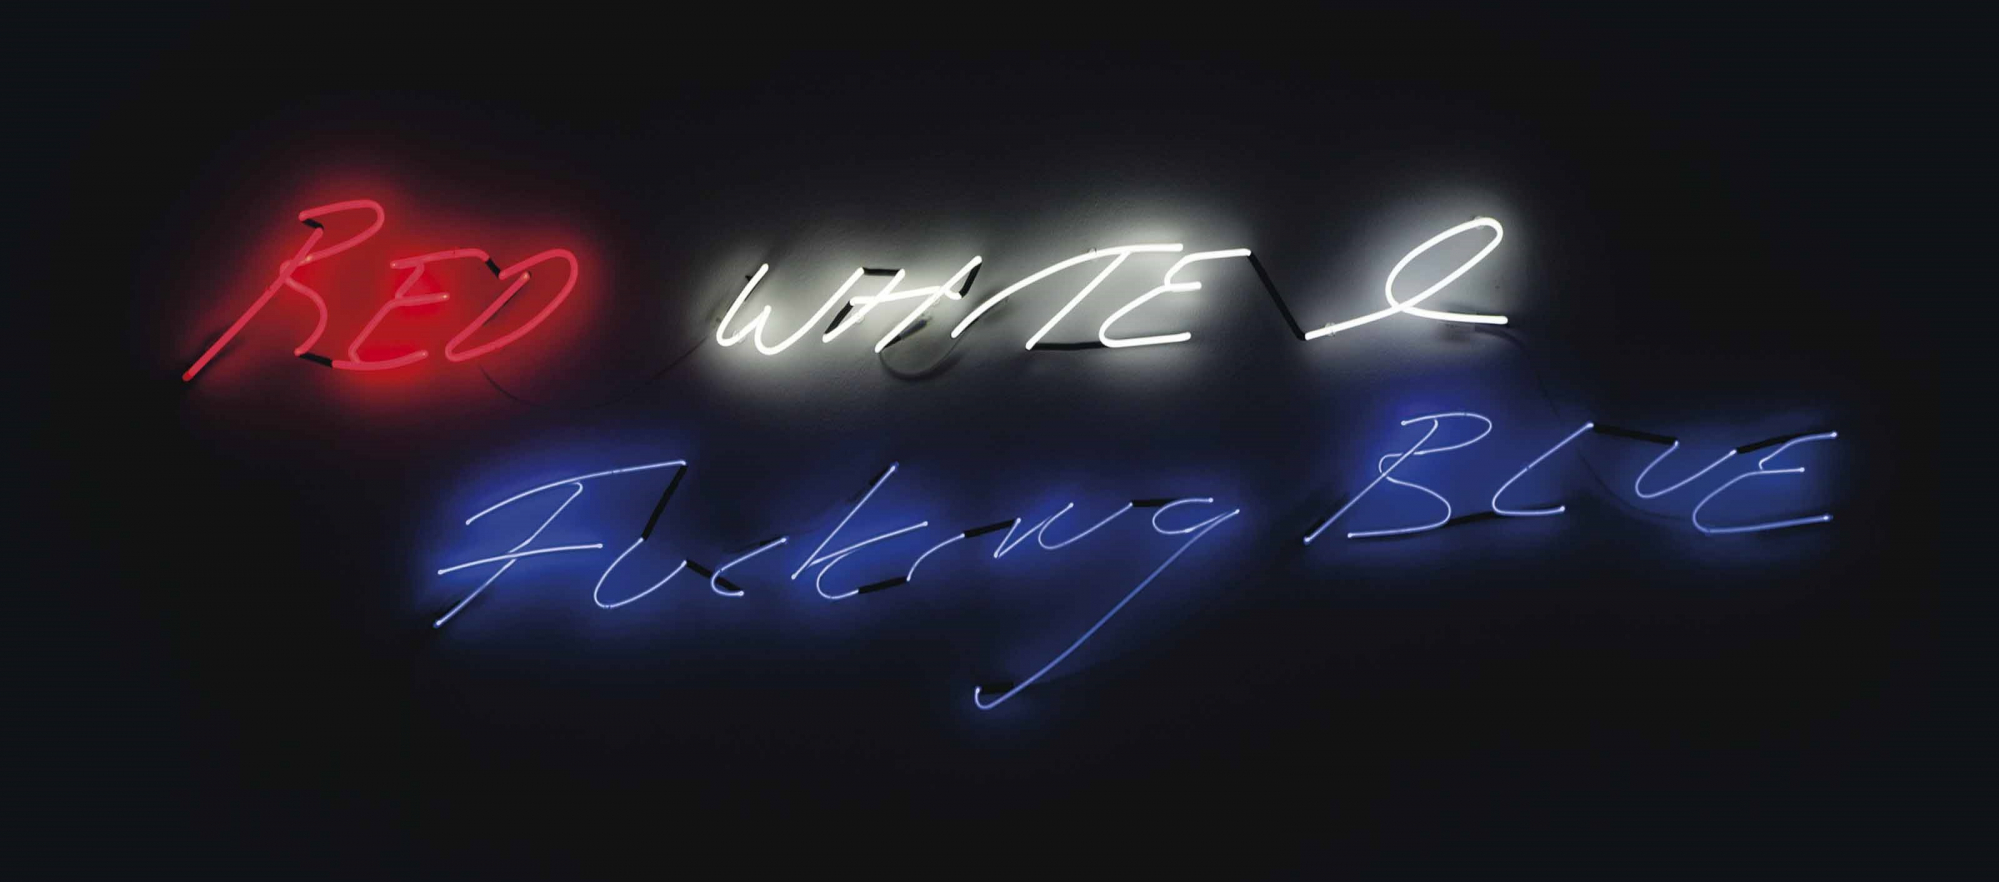 Tracey Emin | Red, white and fucking blue, 2002/2017